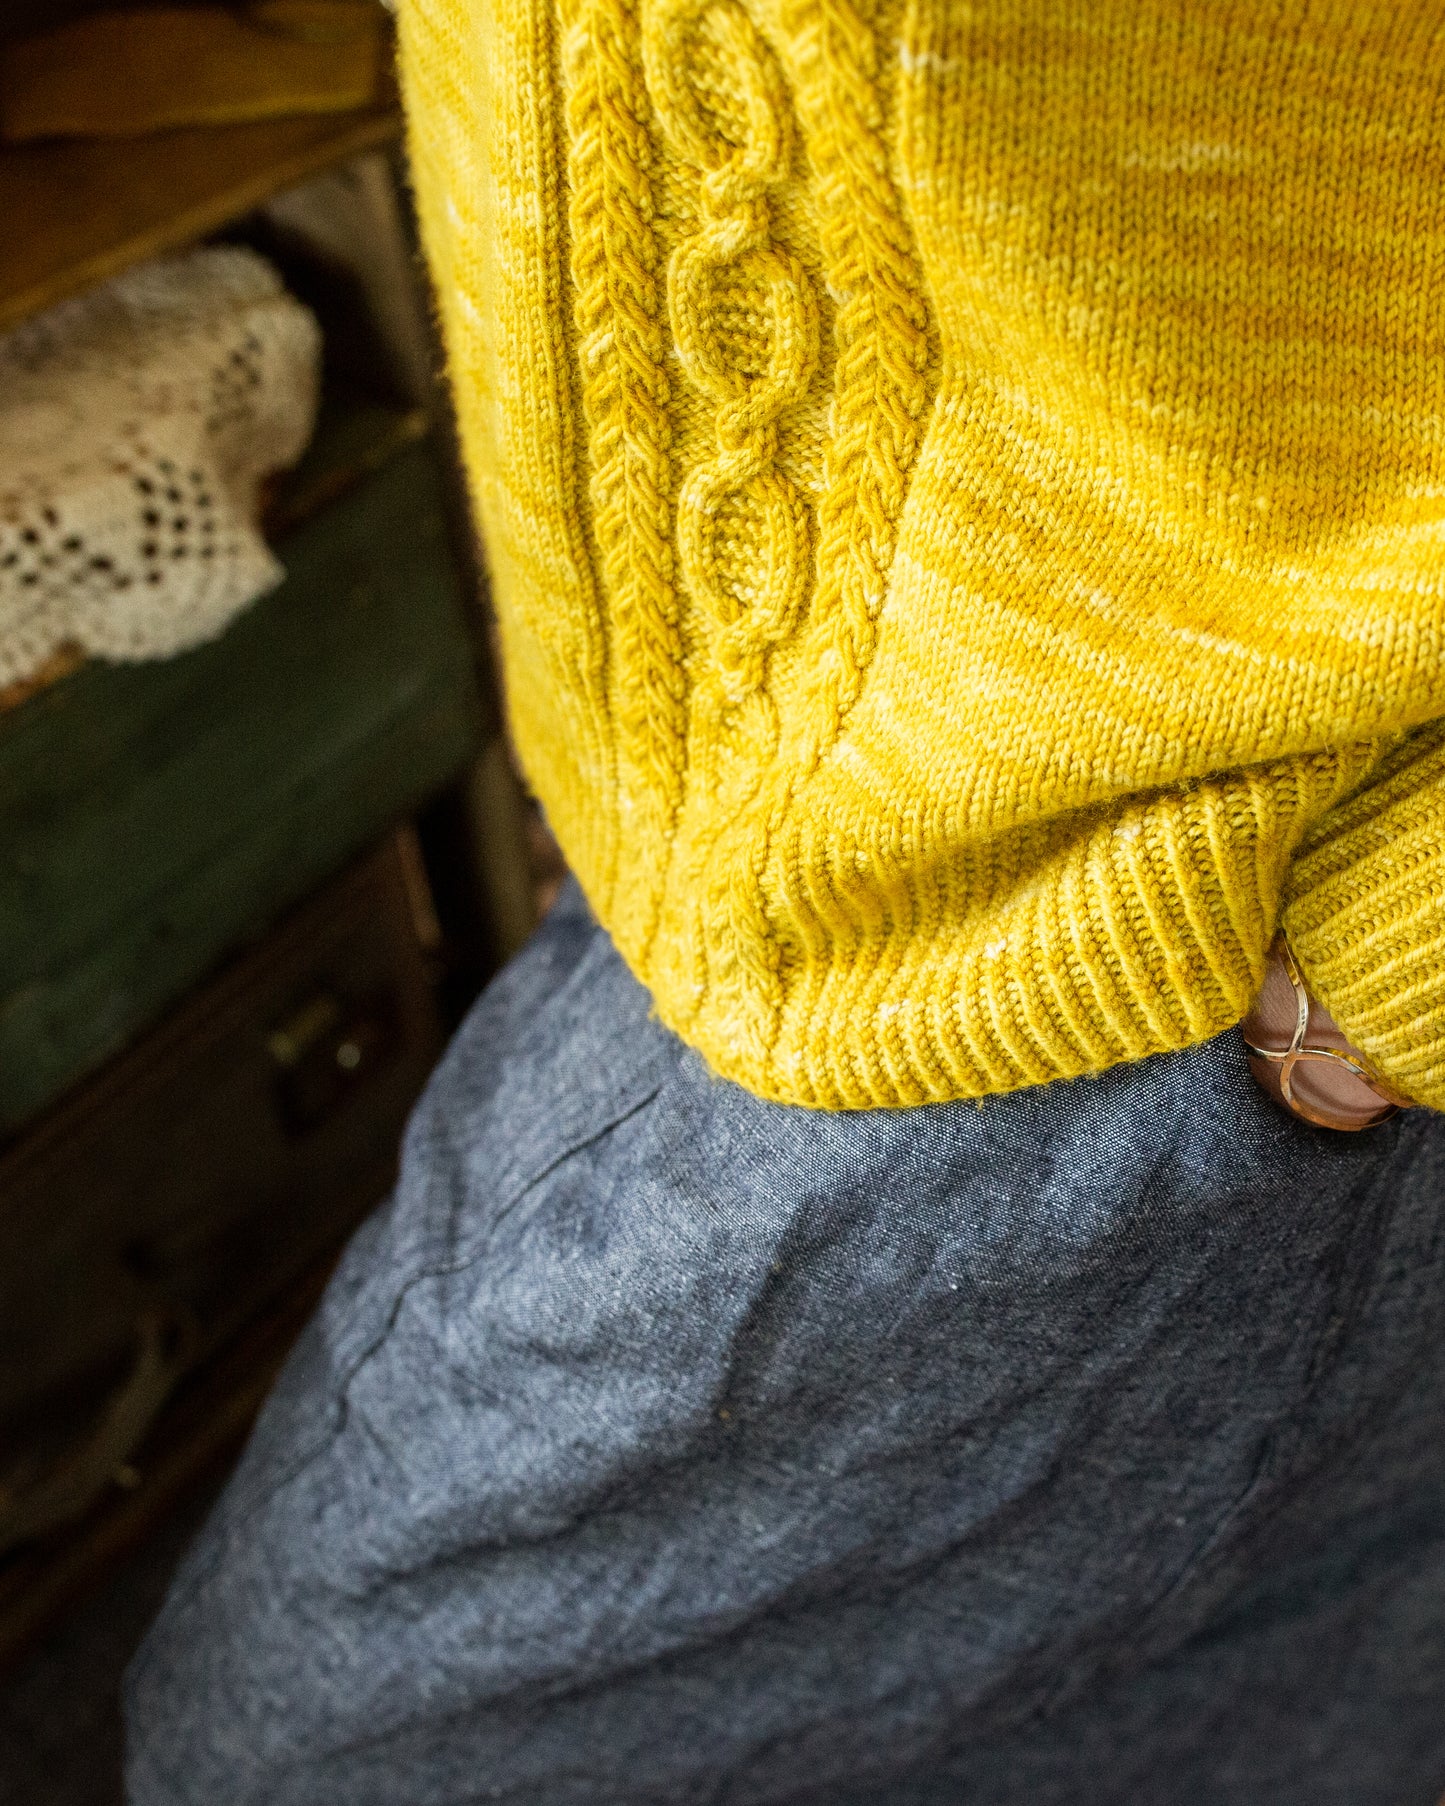 Jen wears a bright yellow sweater with wide leg blue pants. The camera focuses close up on the ribbed hem and cable strip design.